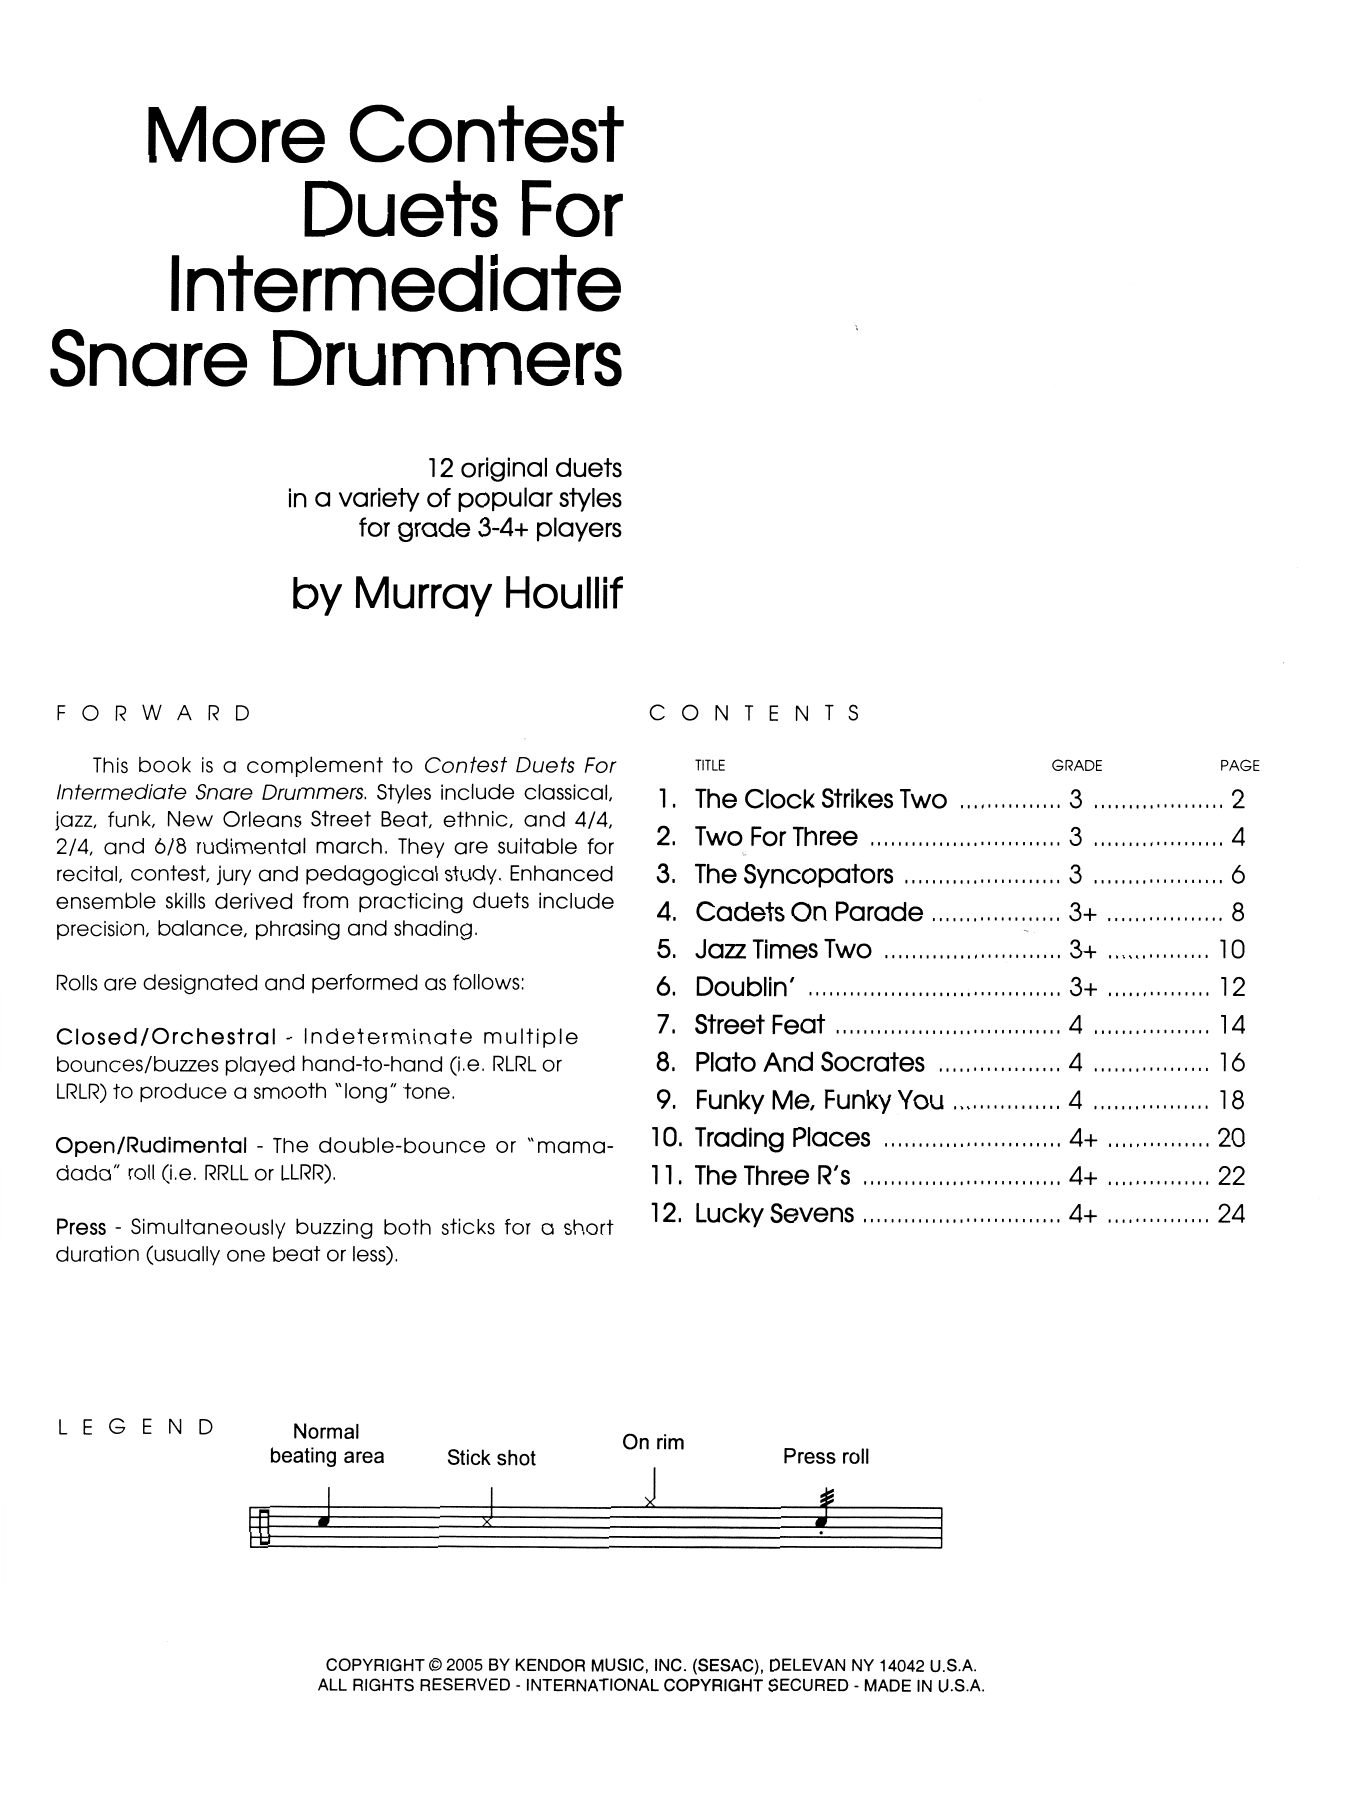 Download Murray Houllif More Contest Duets For Intermediate Sna Sheet Music